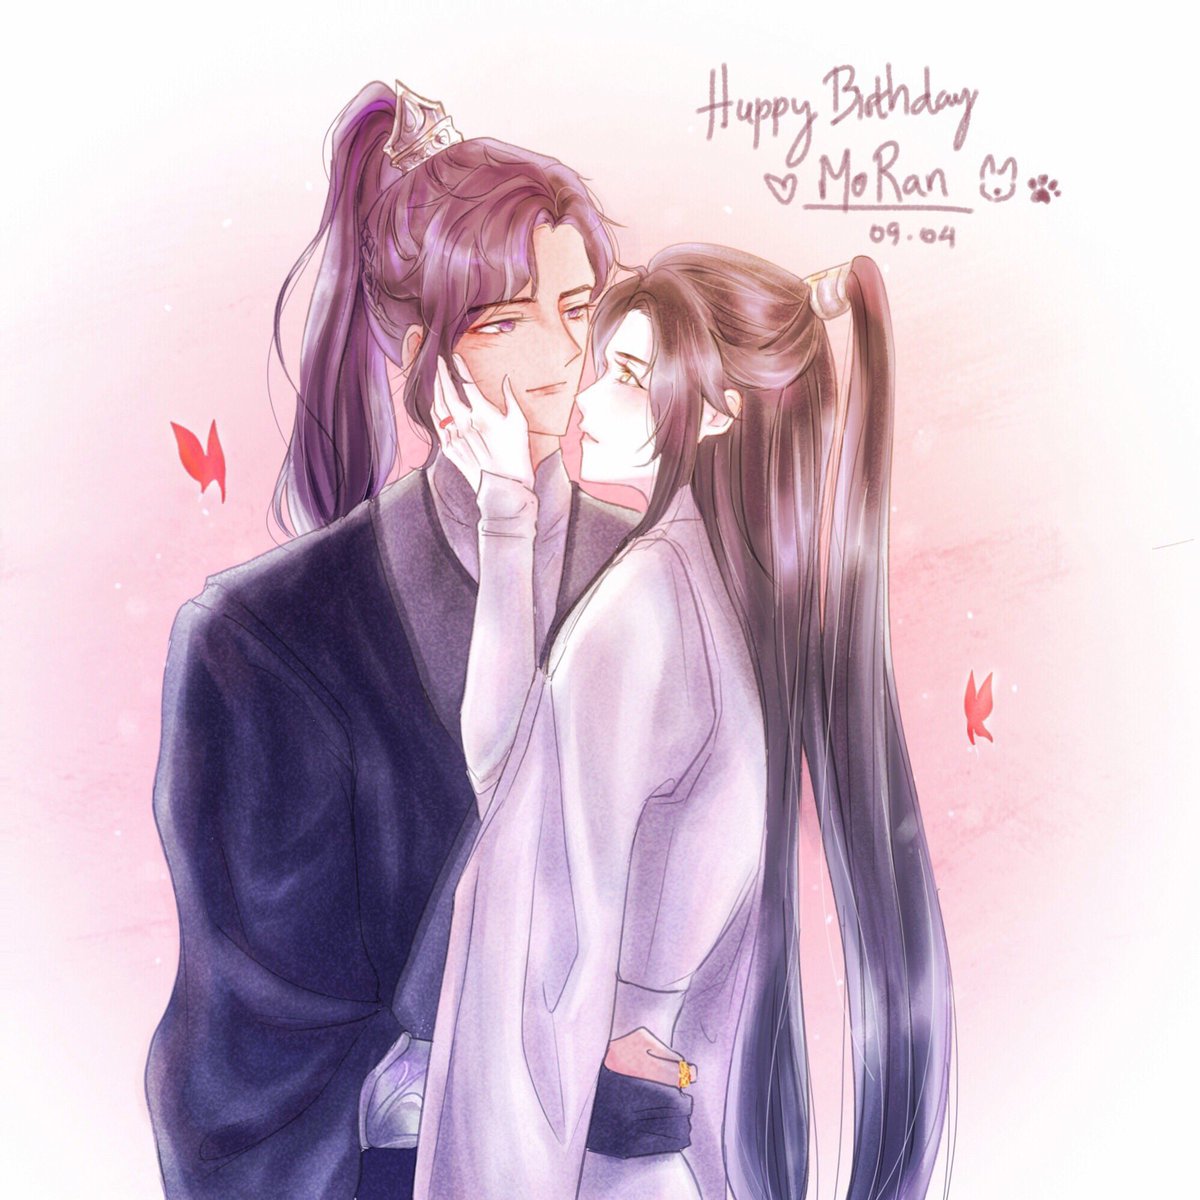 Happy Moran day!
Initially planned for cwn to weave a ring from tianwen and jiangui to give to moran but I wasnt able to draw it so it’s just ranwan being lovey dovey 🙈

#墨燃0409生日快乐 #HappyMoRanDay  #ranwan